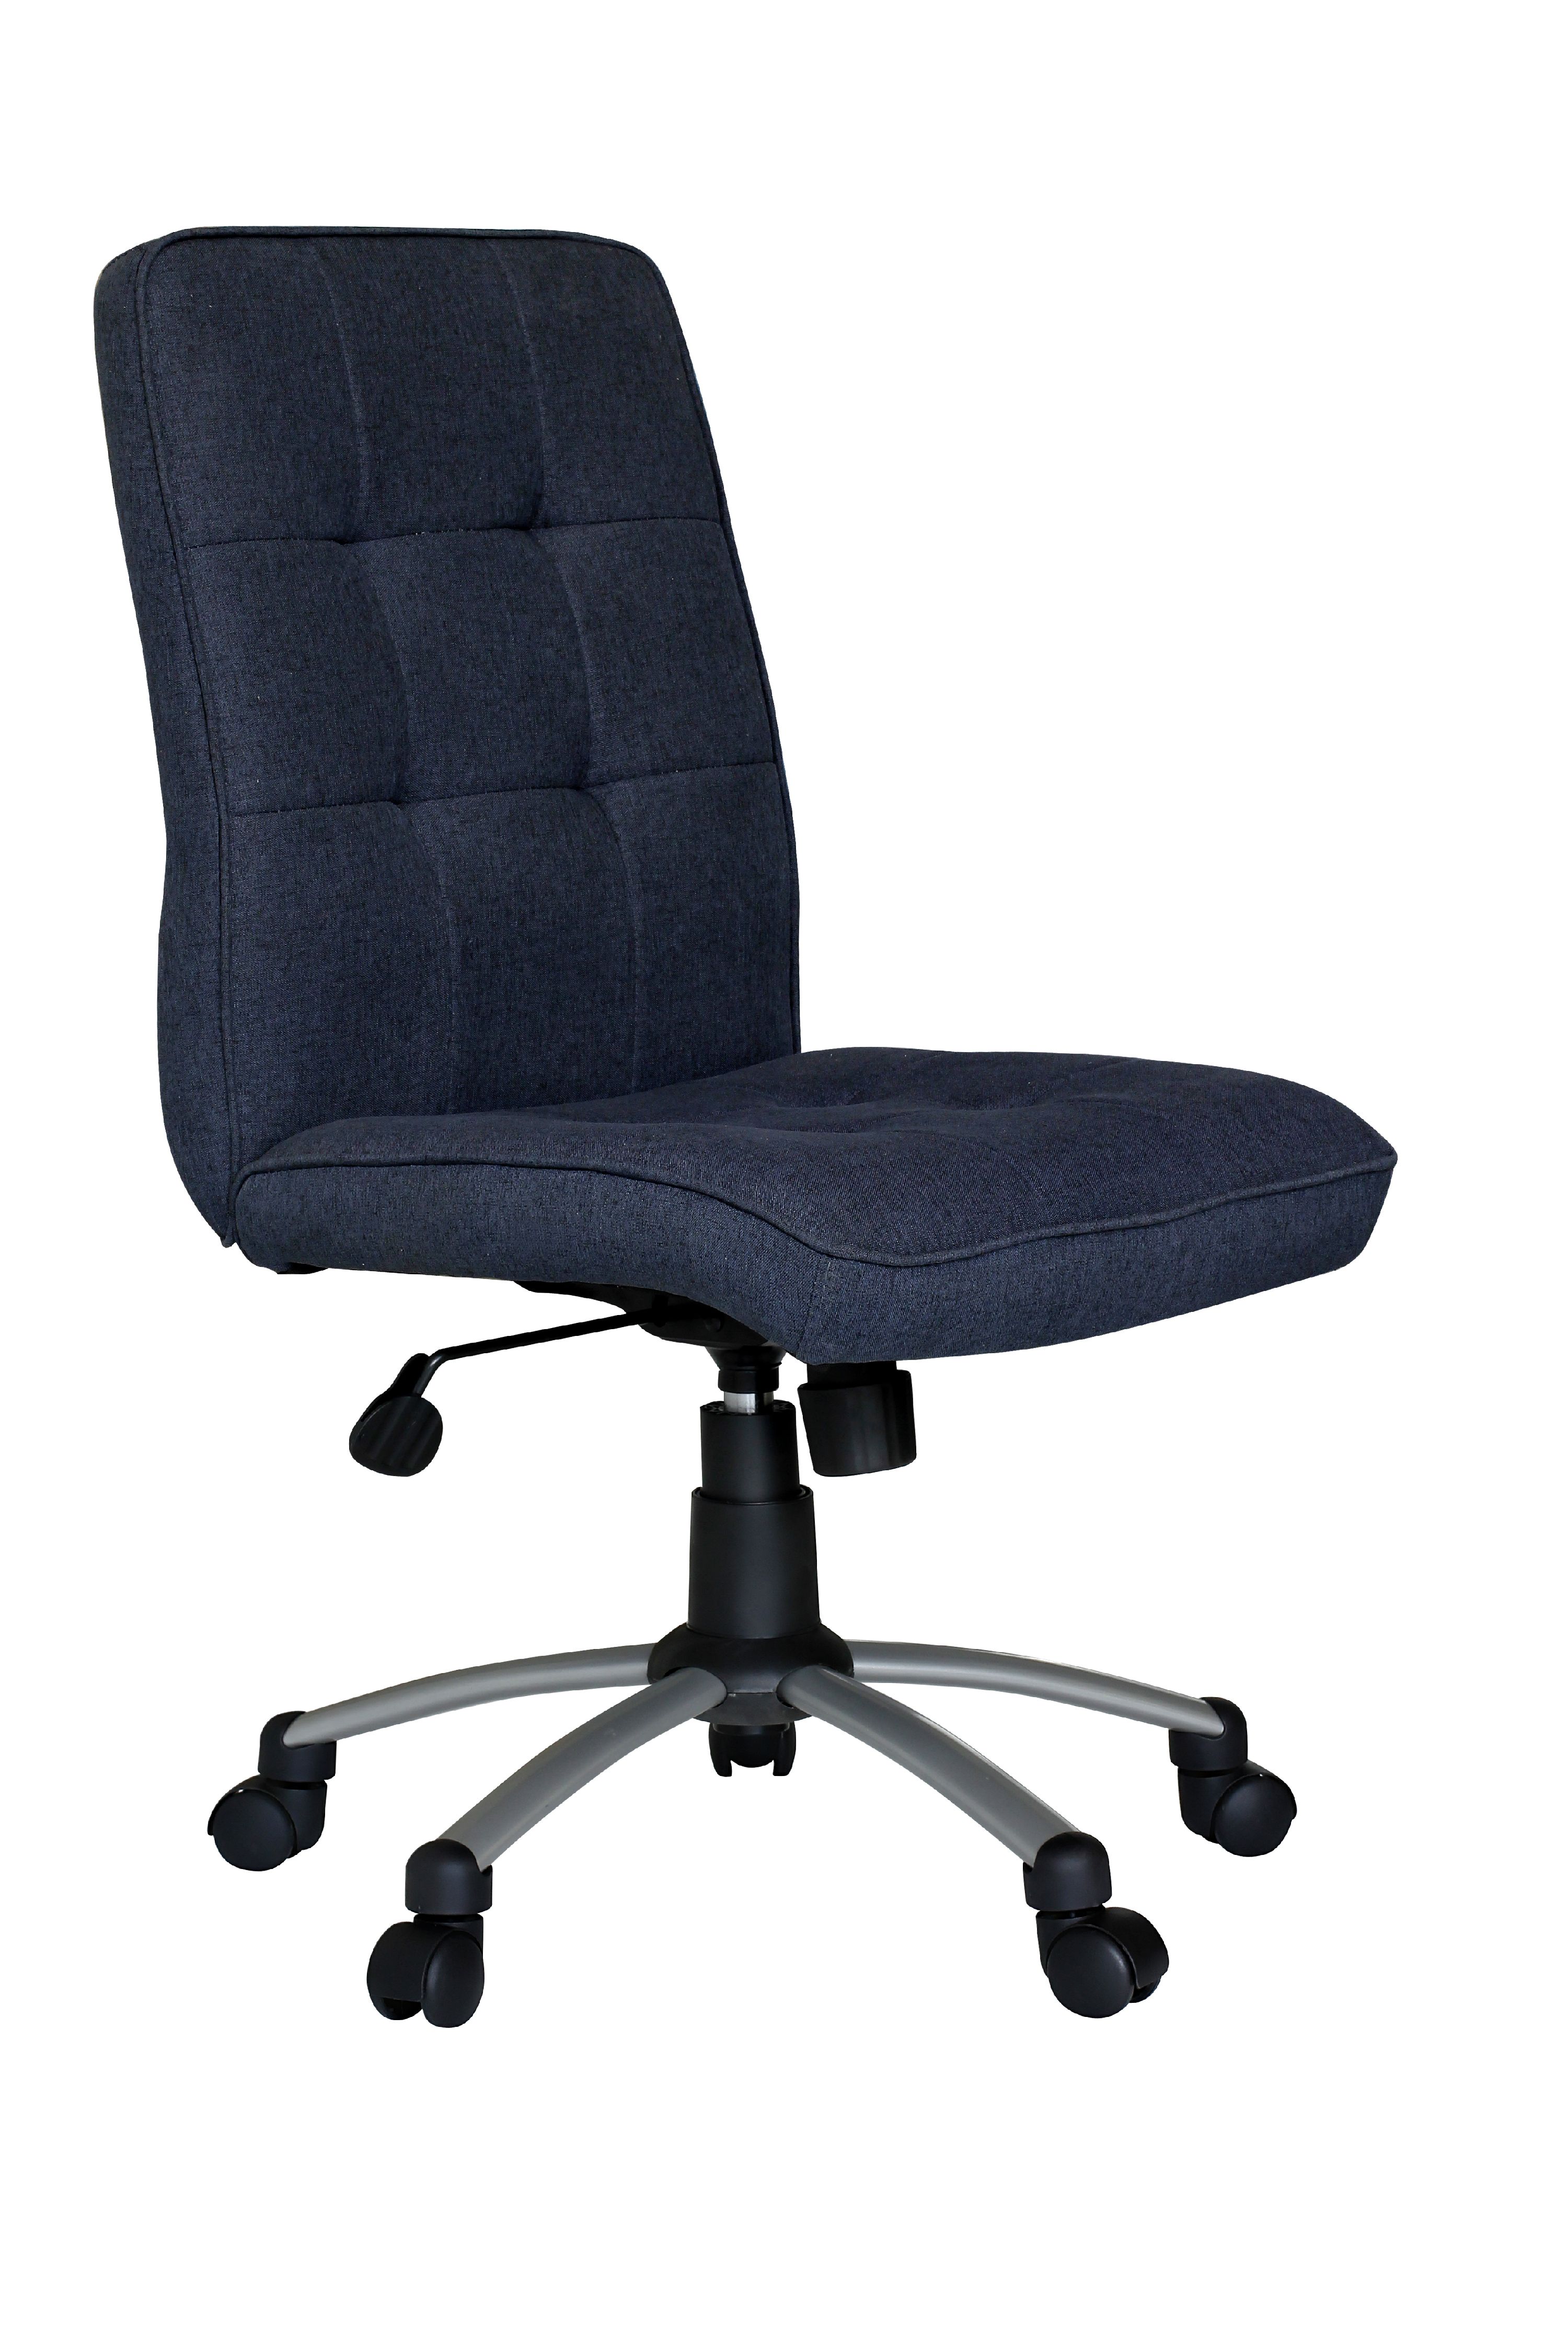 Boss Office & Home Donna Modern Mid-Back Armless Office Desk Chair, Multiple Colors - image 1 of 8